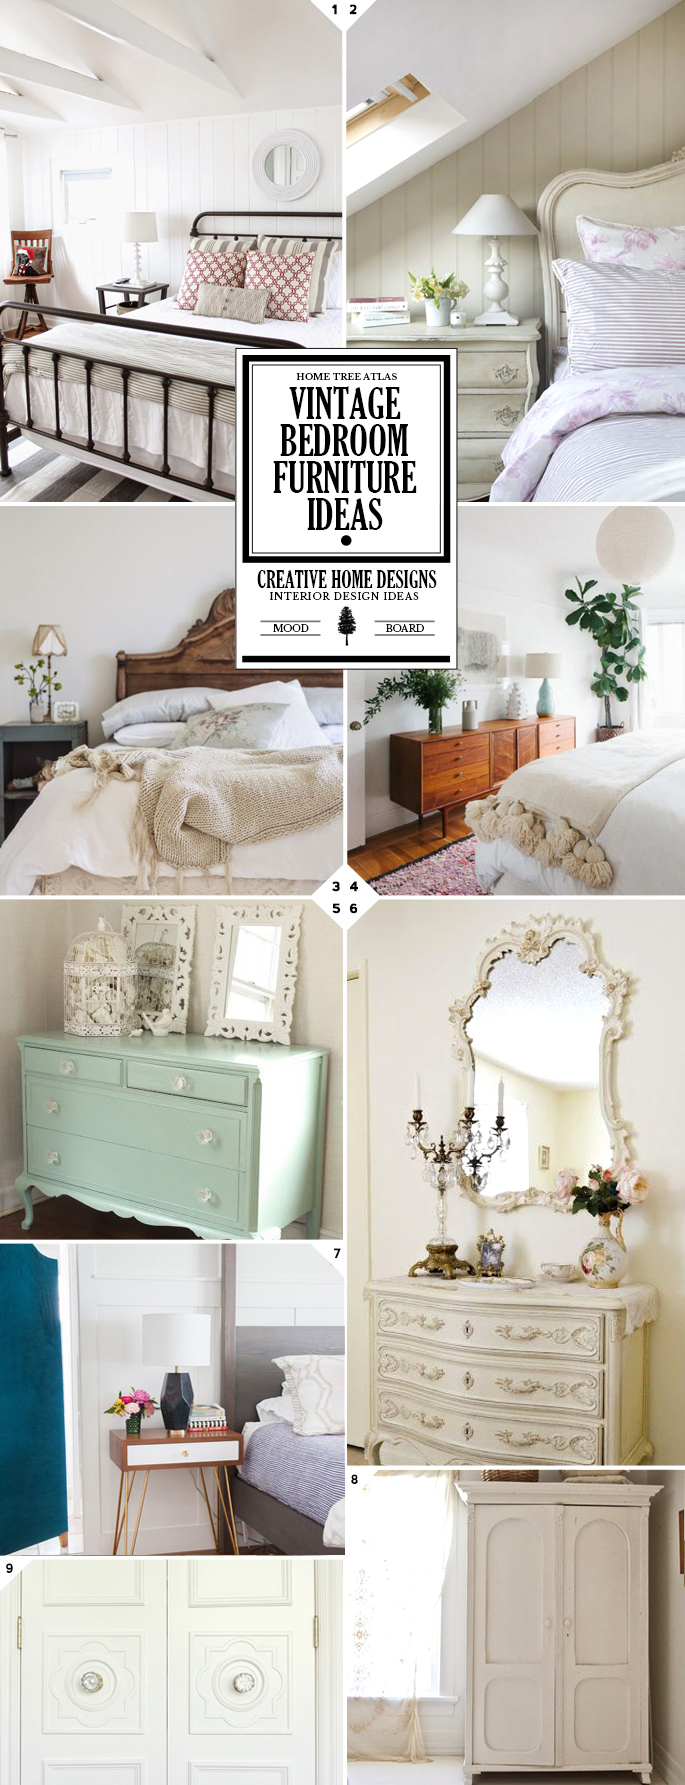 Styling Your Space: Vintage Bedroom Furniture Ideas